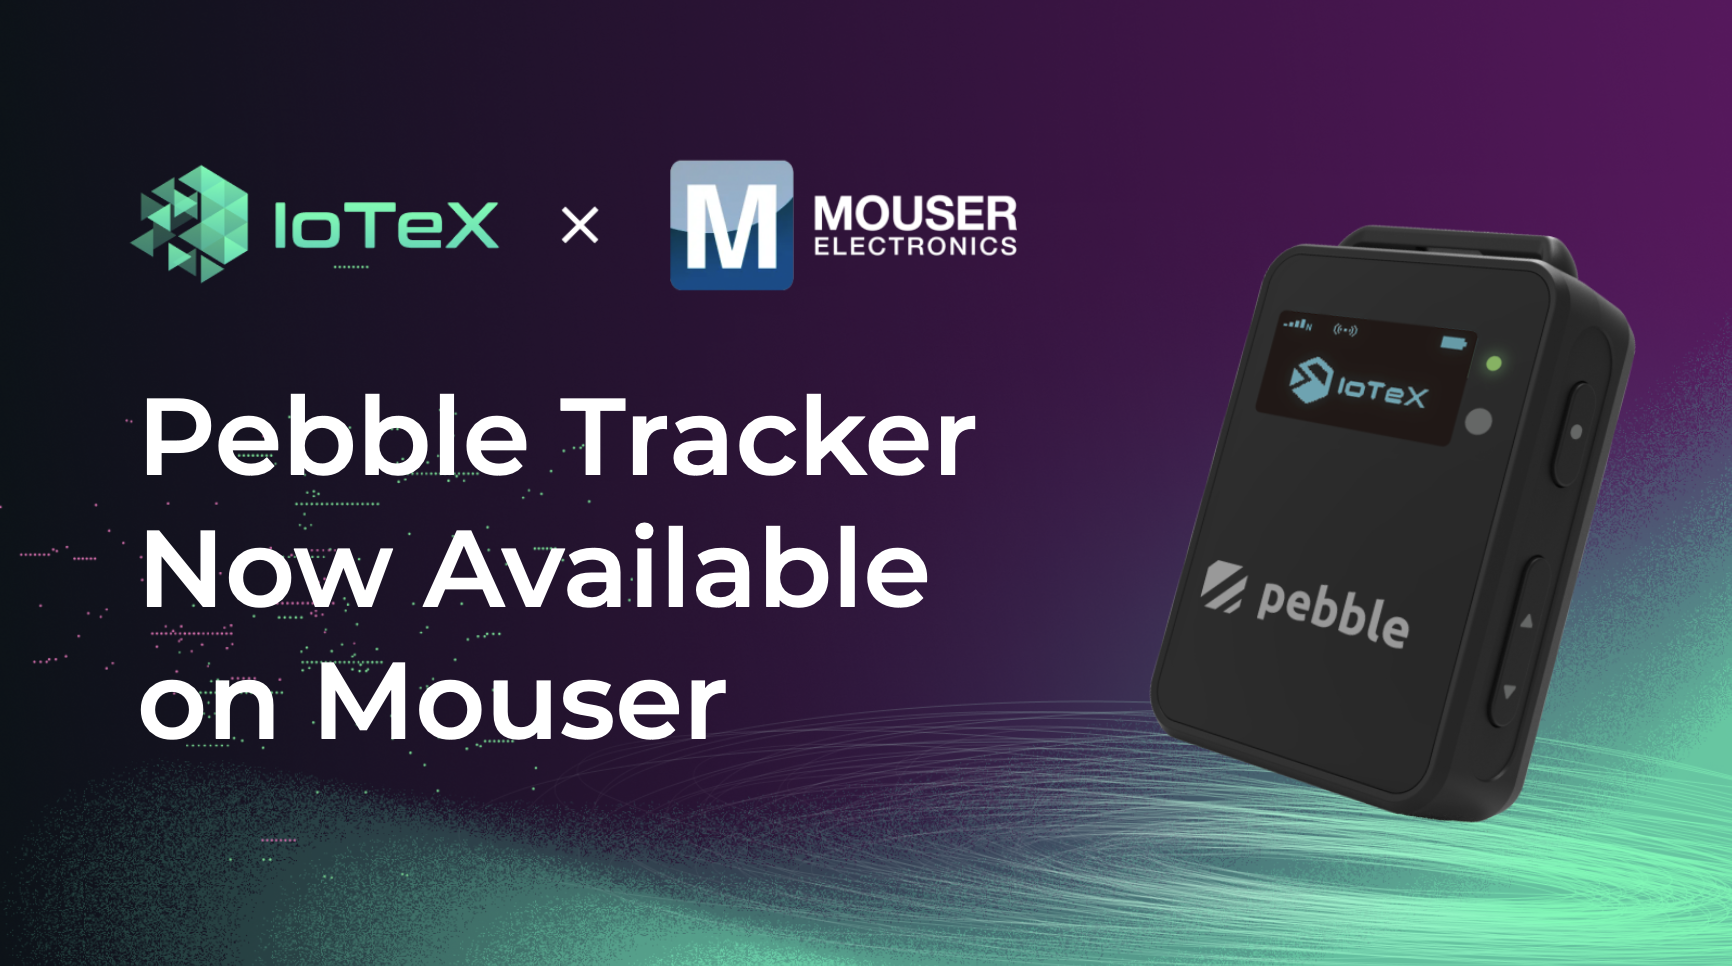 Pebble Tracker Now Available on Mouser Electronics